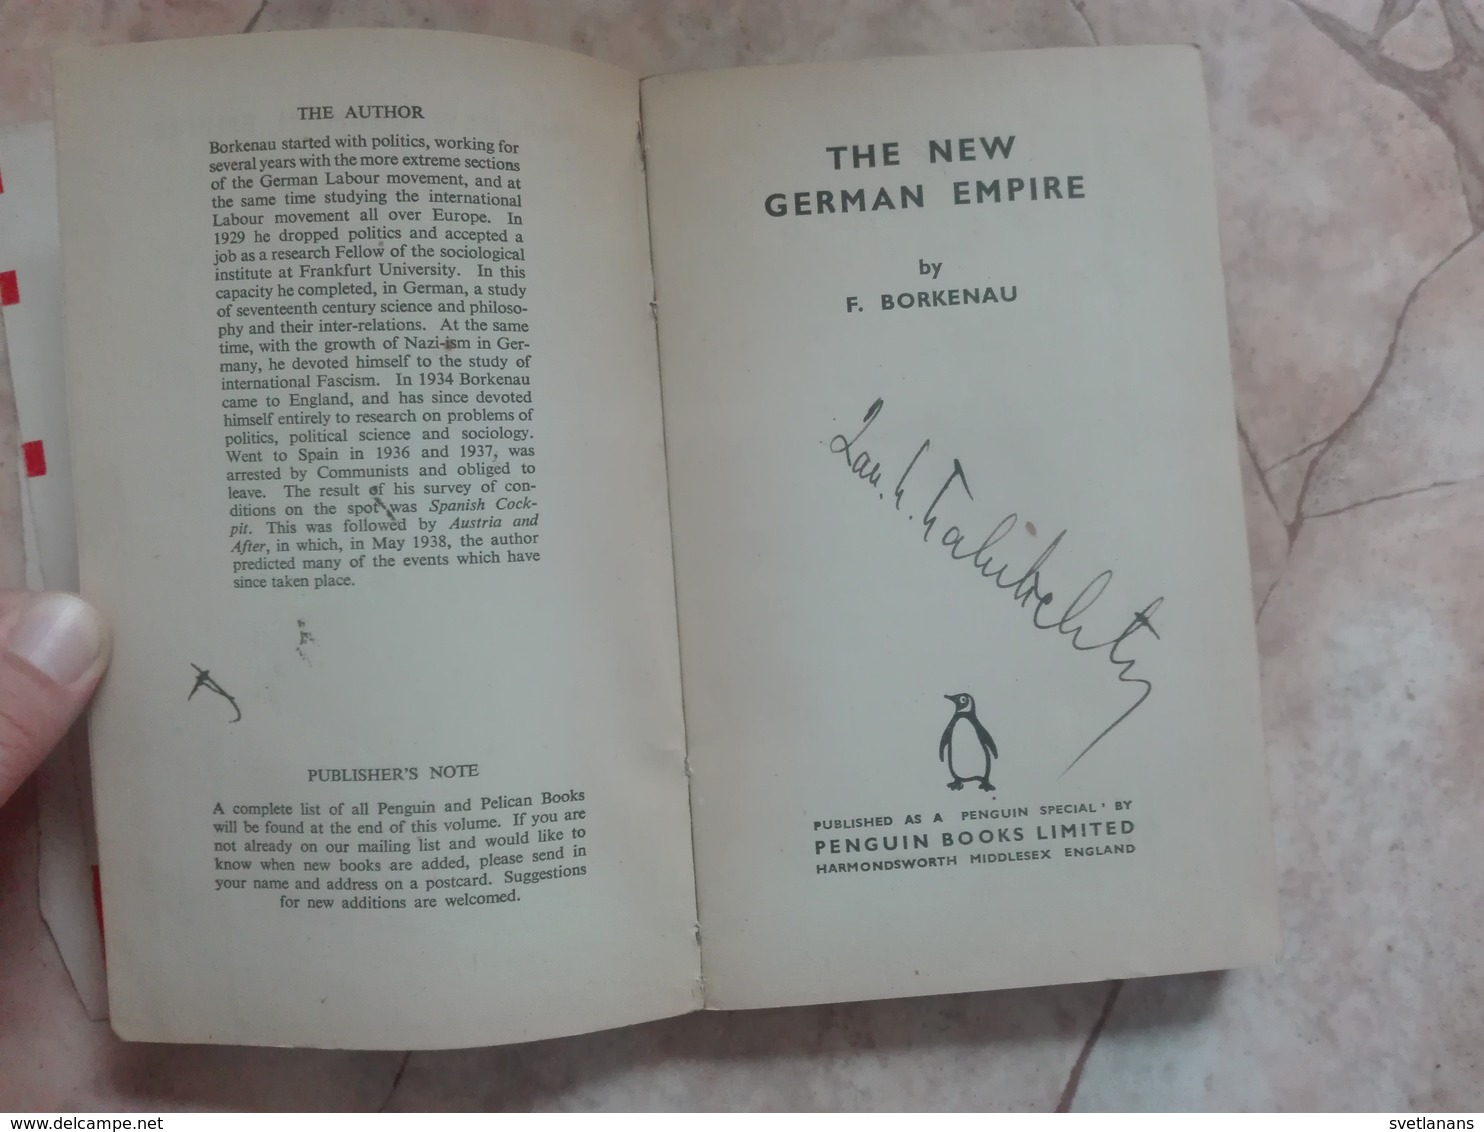 WW2 WWII THE NEW GERMAN EMPIRE F. BORKENAU PENGUIN SPECIAL Paperback 1939 BOOK GERMANY - Oorlog 1939-45